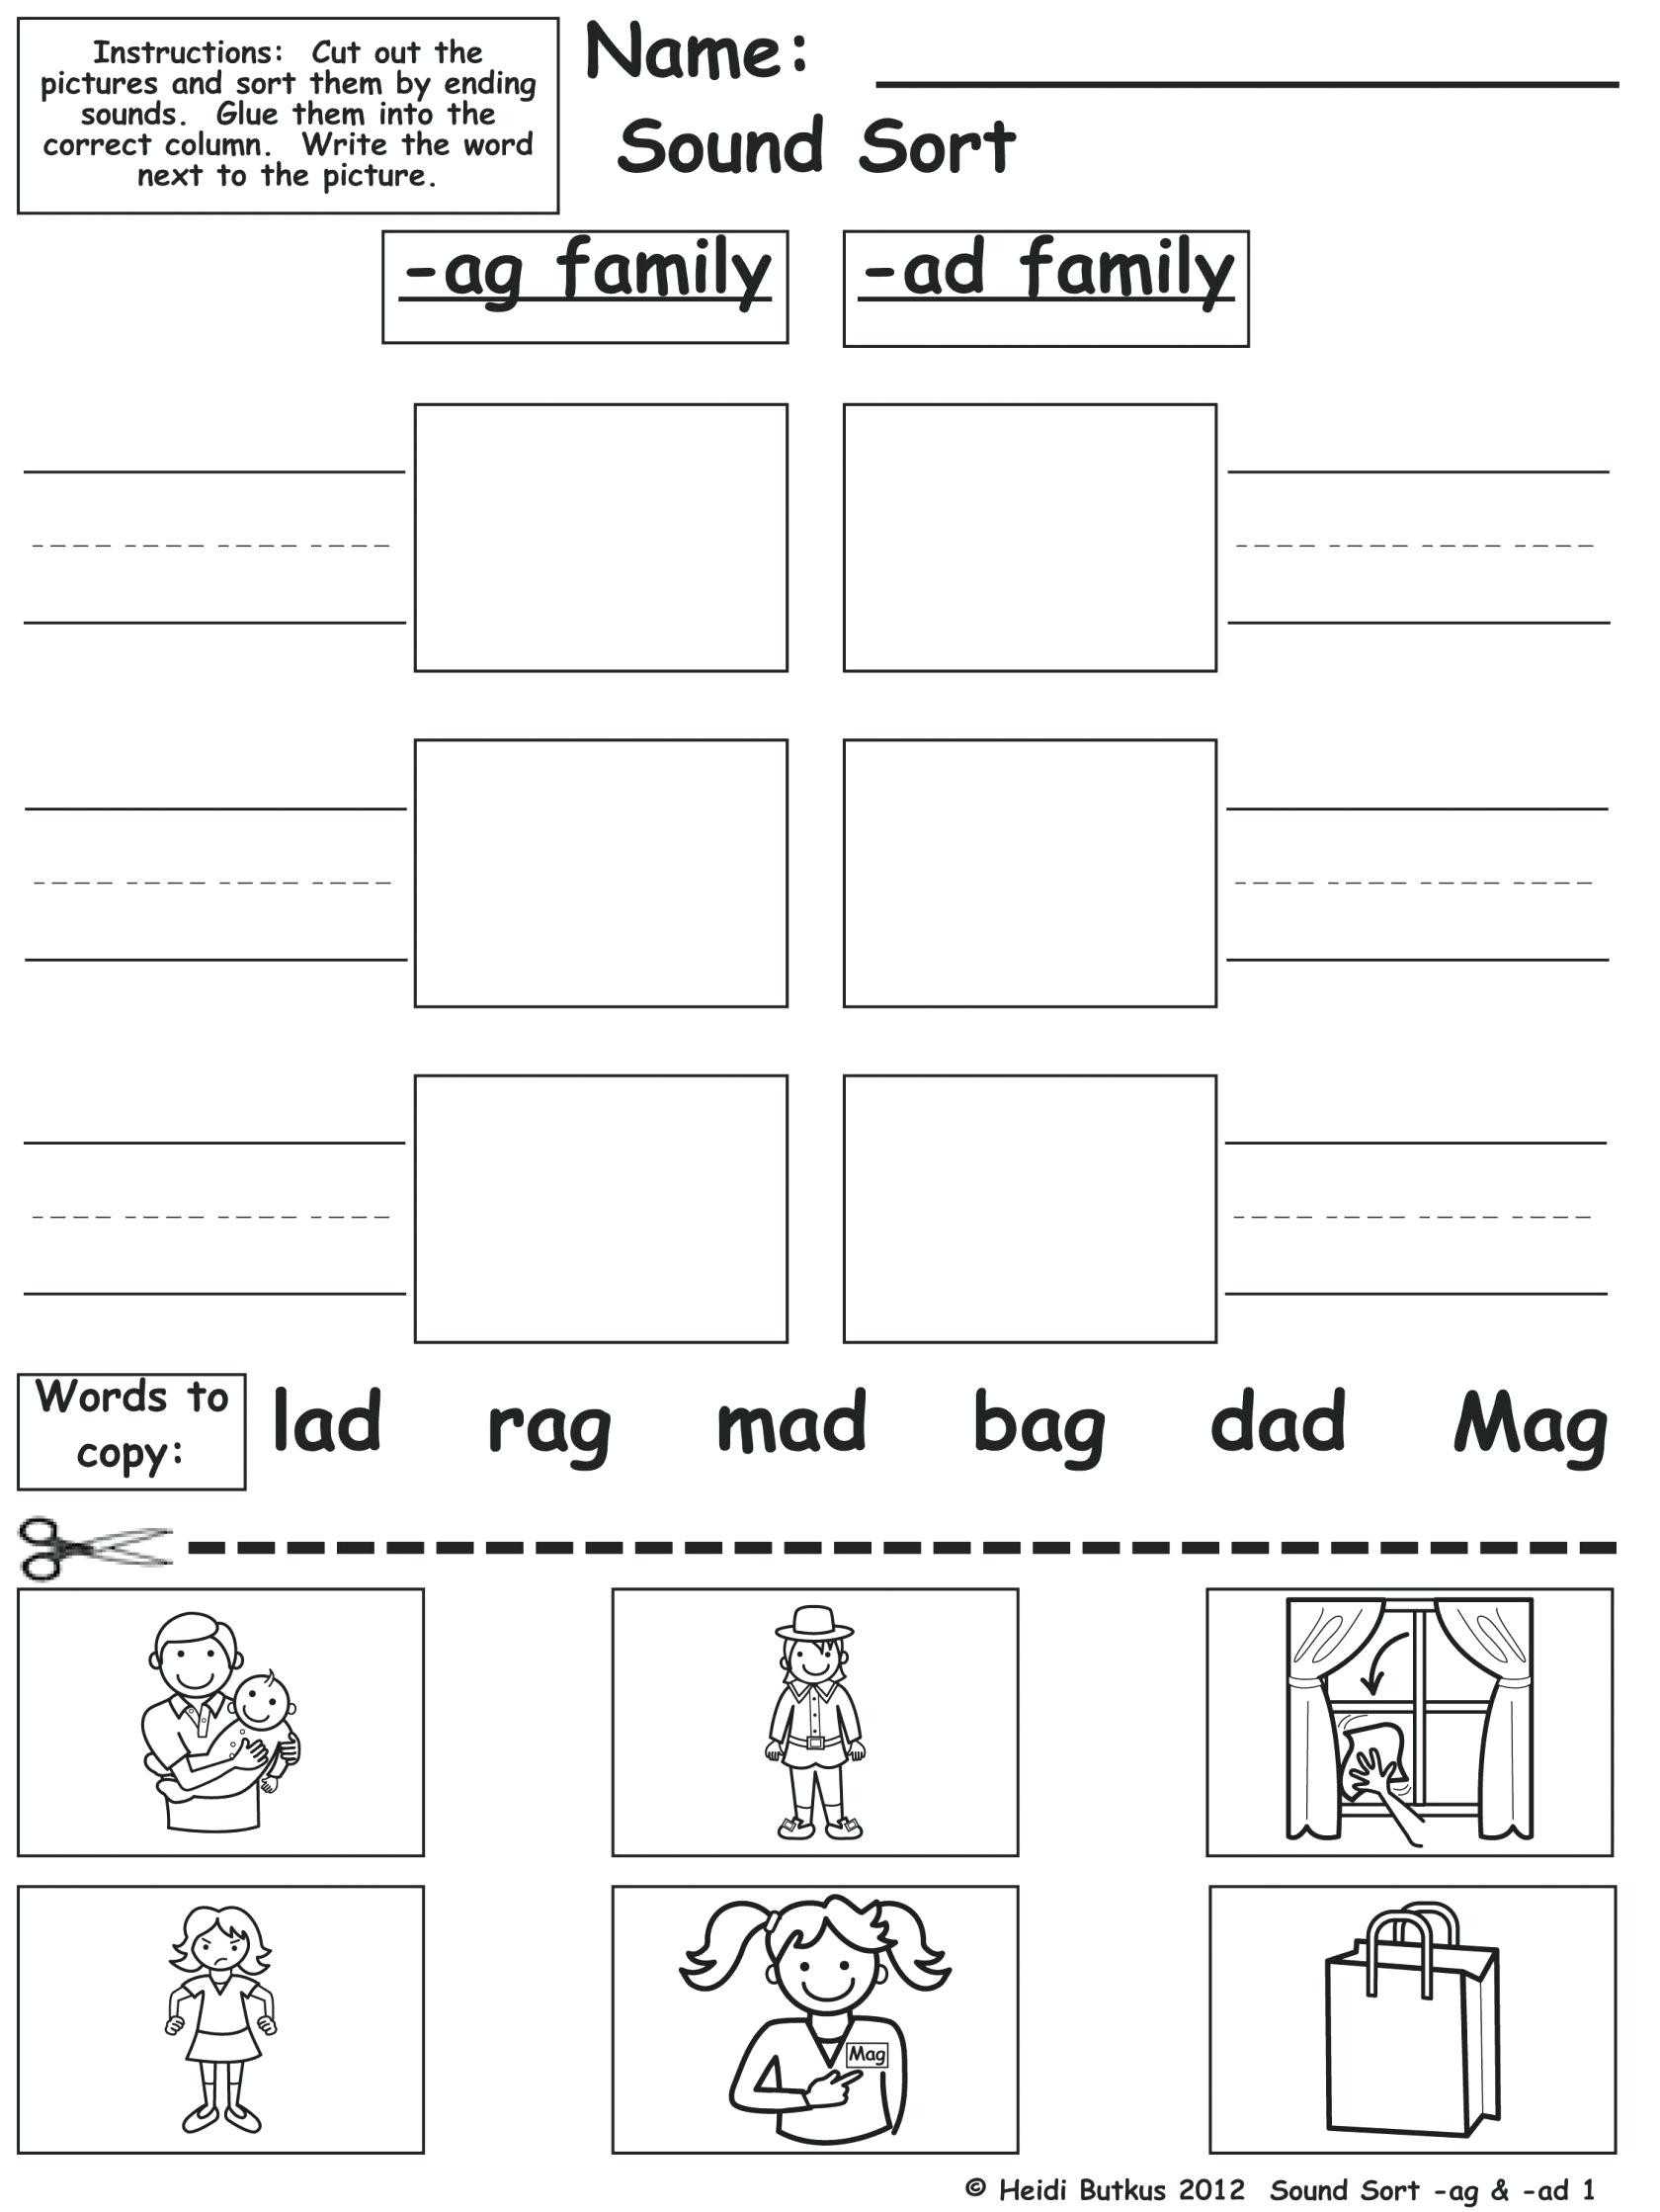 Word Family Worksheets Pdf as Well as Word Family Id Worksheets Best Word Family Worksheets Pdf D by